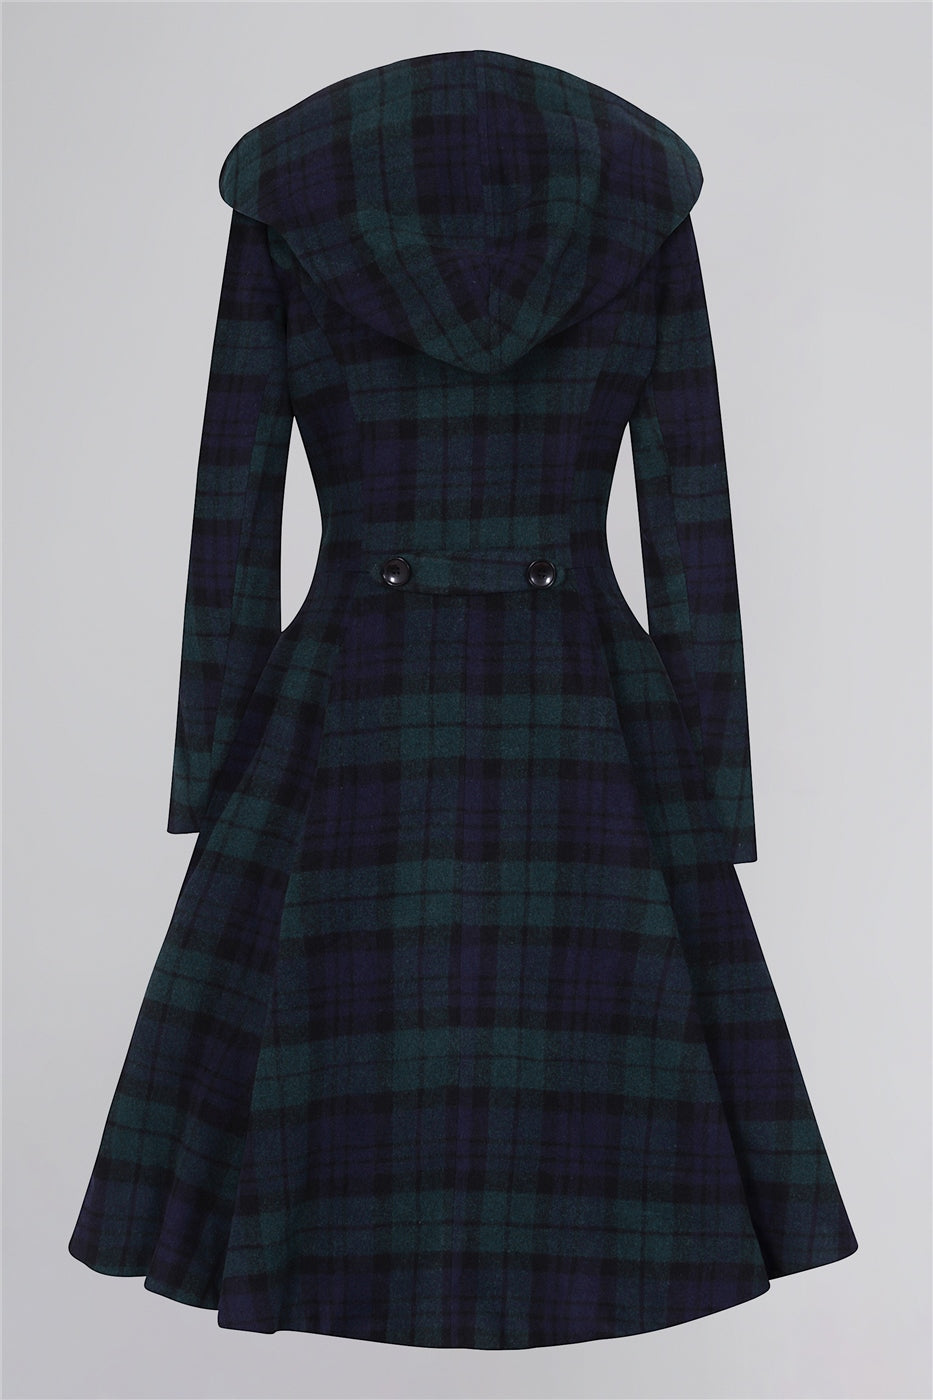 The back of the Heather Blackwatch Coat by Collectif